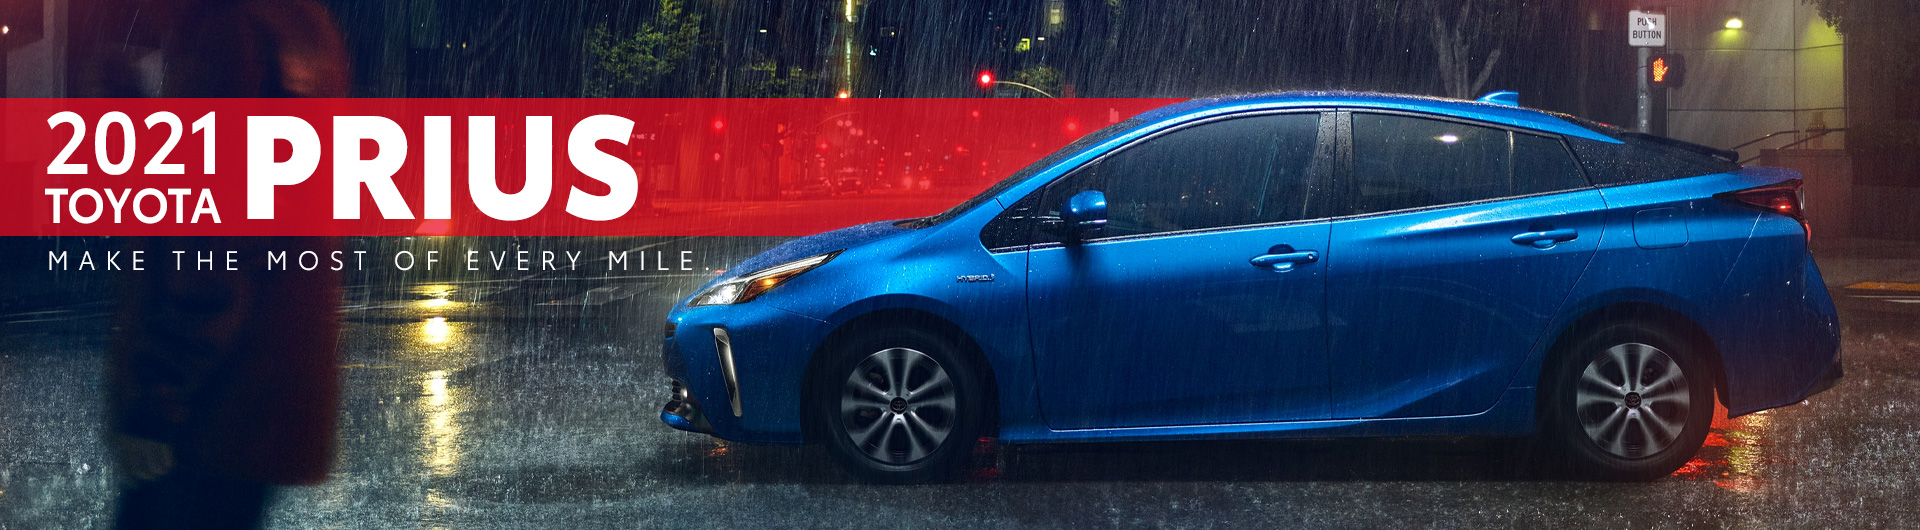 A New 2021 Toyota Prius at Younger Toyota in Hagerstown, MD